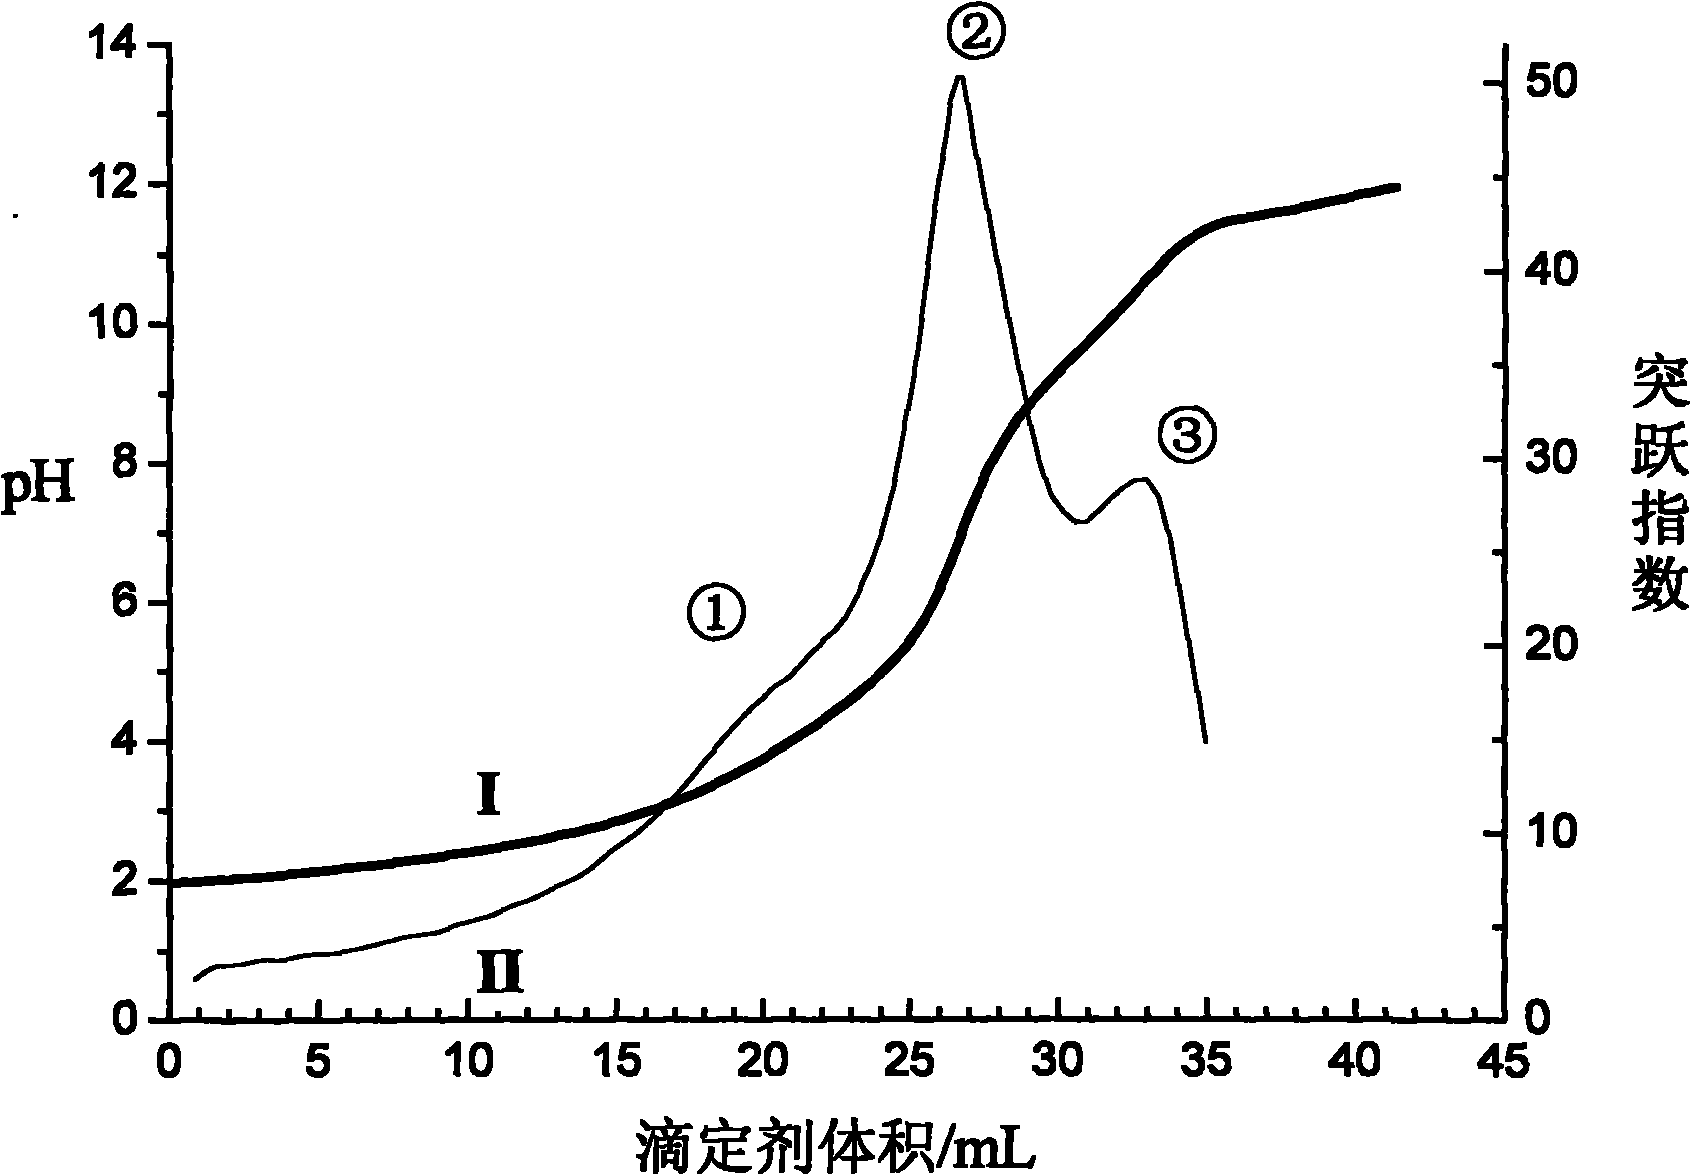 Continuous potentiometric titration analysis method for micromolecule carboxylic acid and amino acid